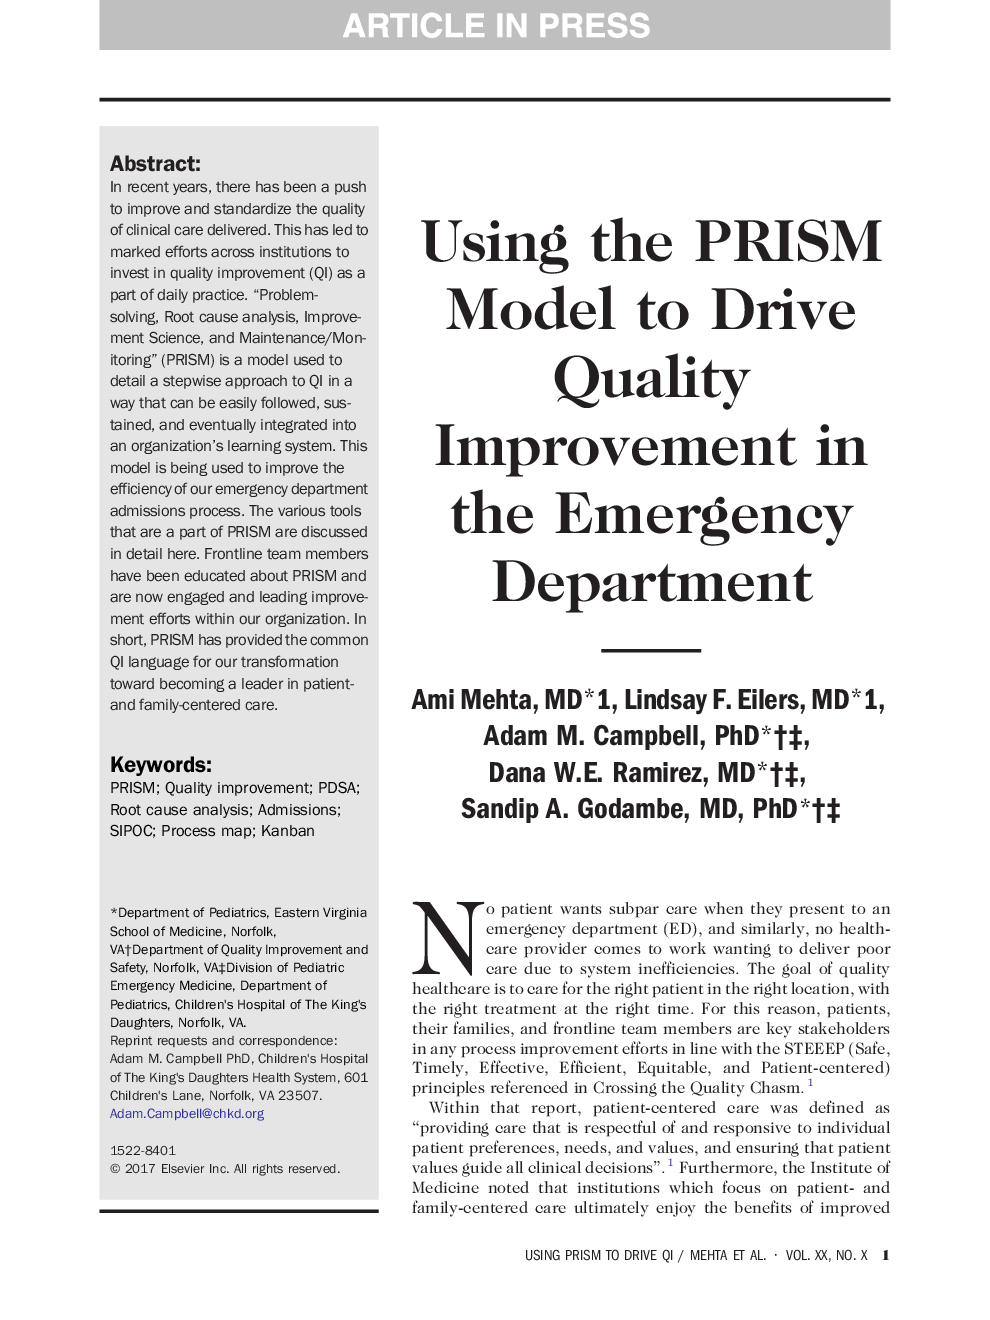 Using the PRISM Model to Drive Quality Improvement in the Emergency Department